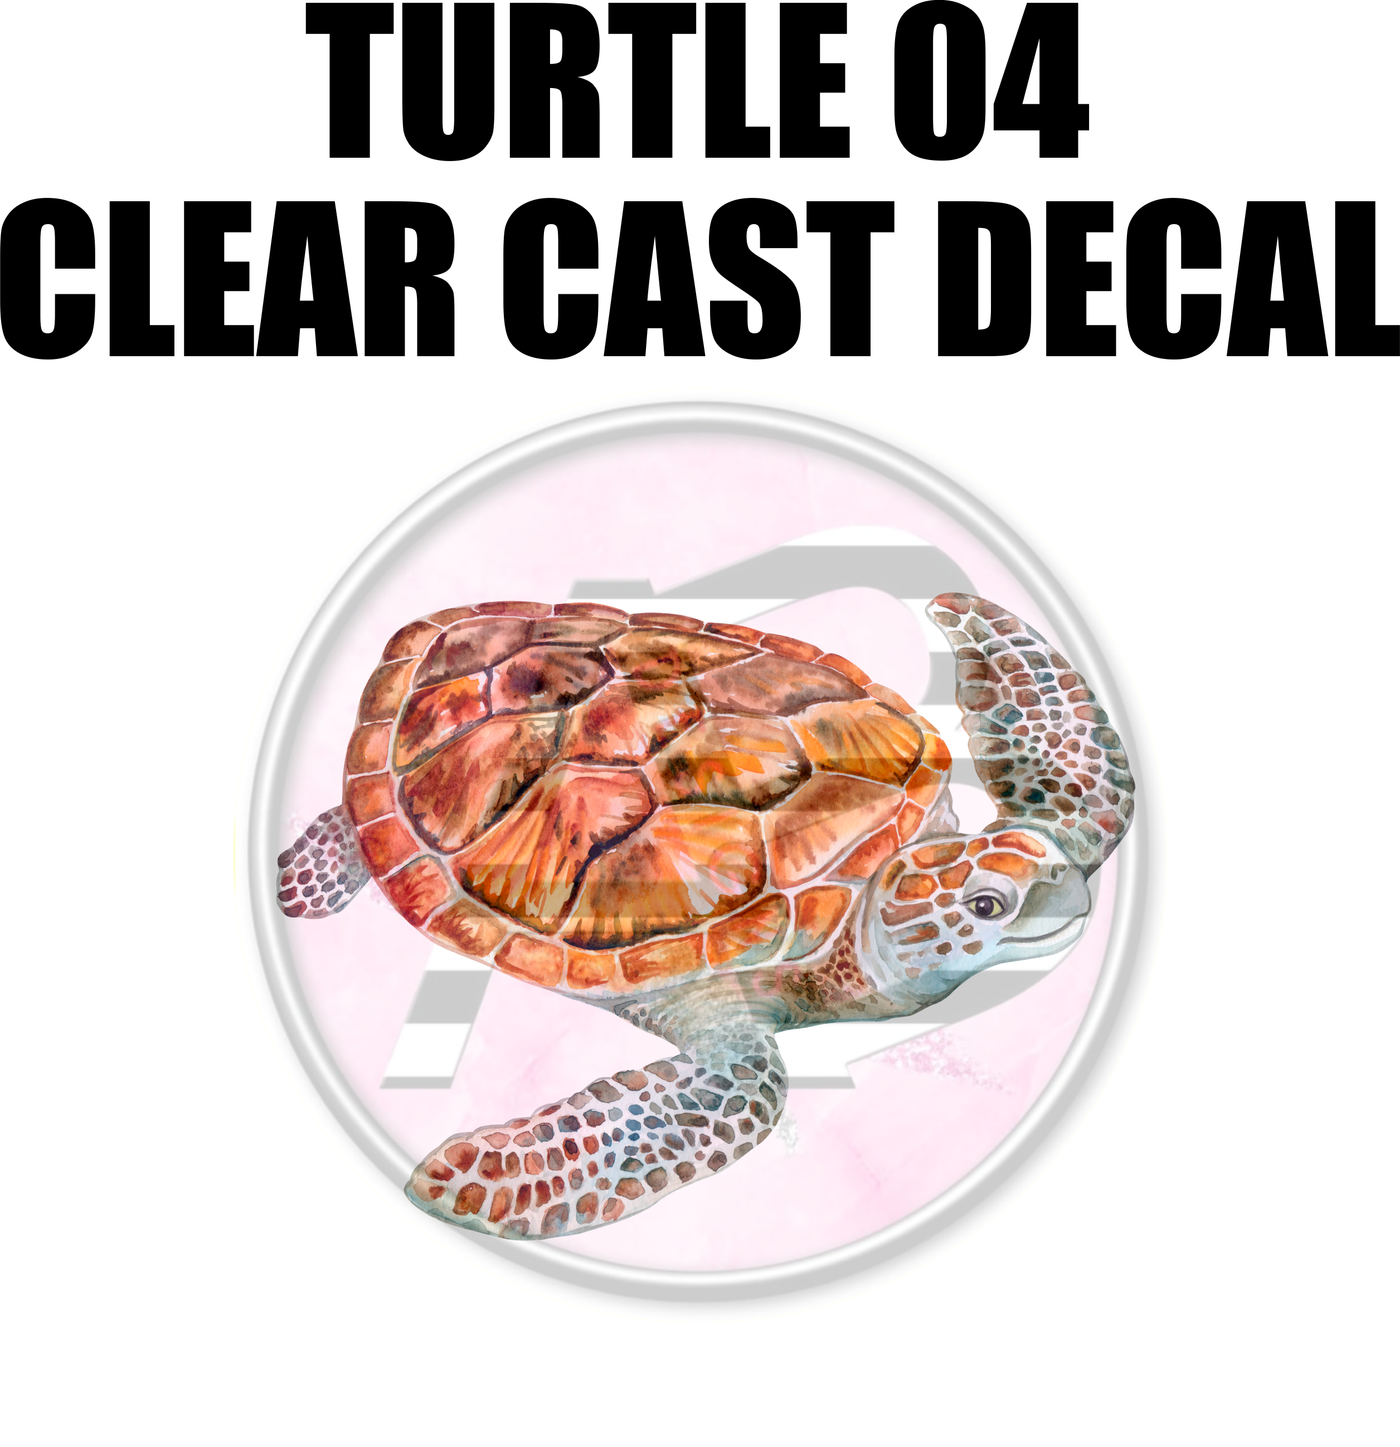 Turtle 04 - Clear Cast Decal